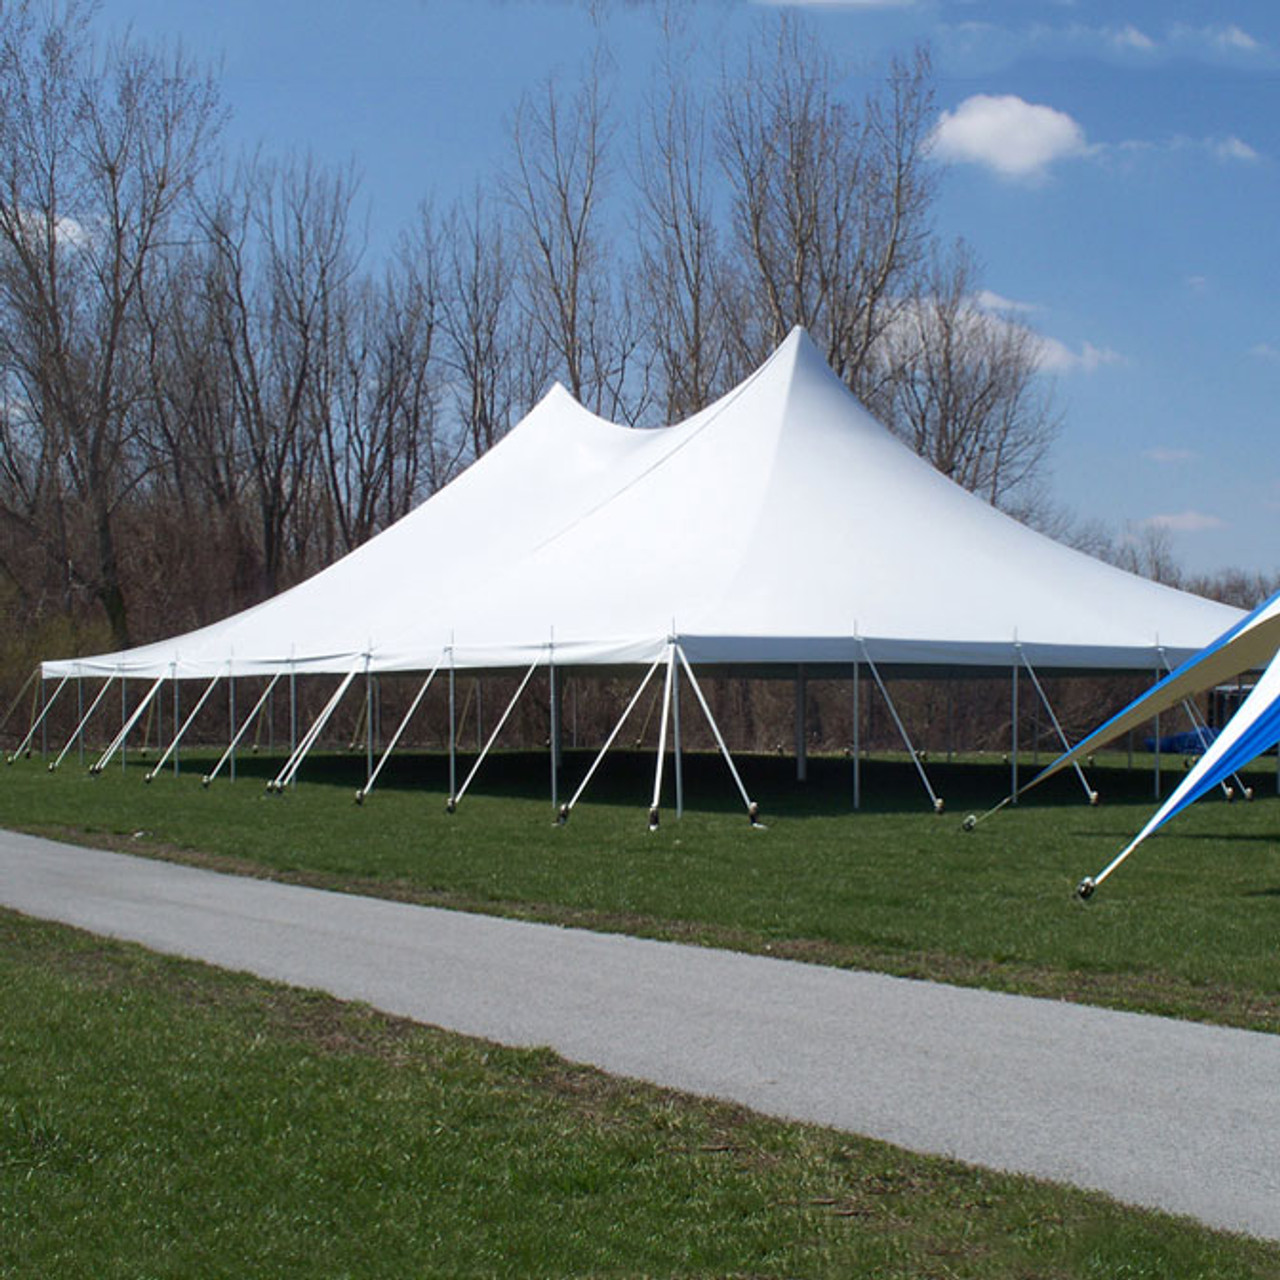 60' x 90' Premiere II Series High Peak Pole Tent, Sectional Tent Top, Complete